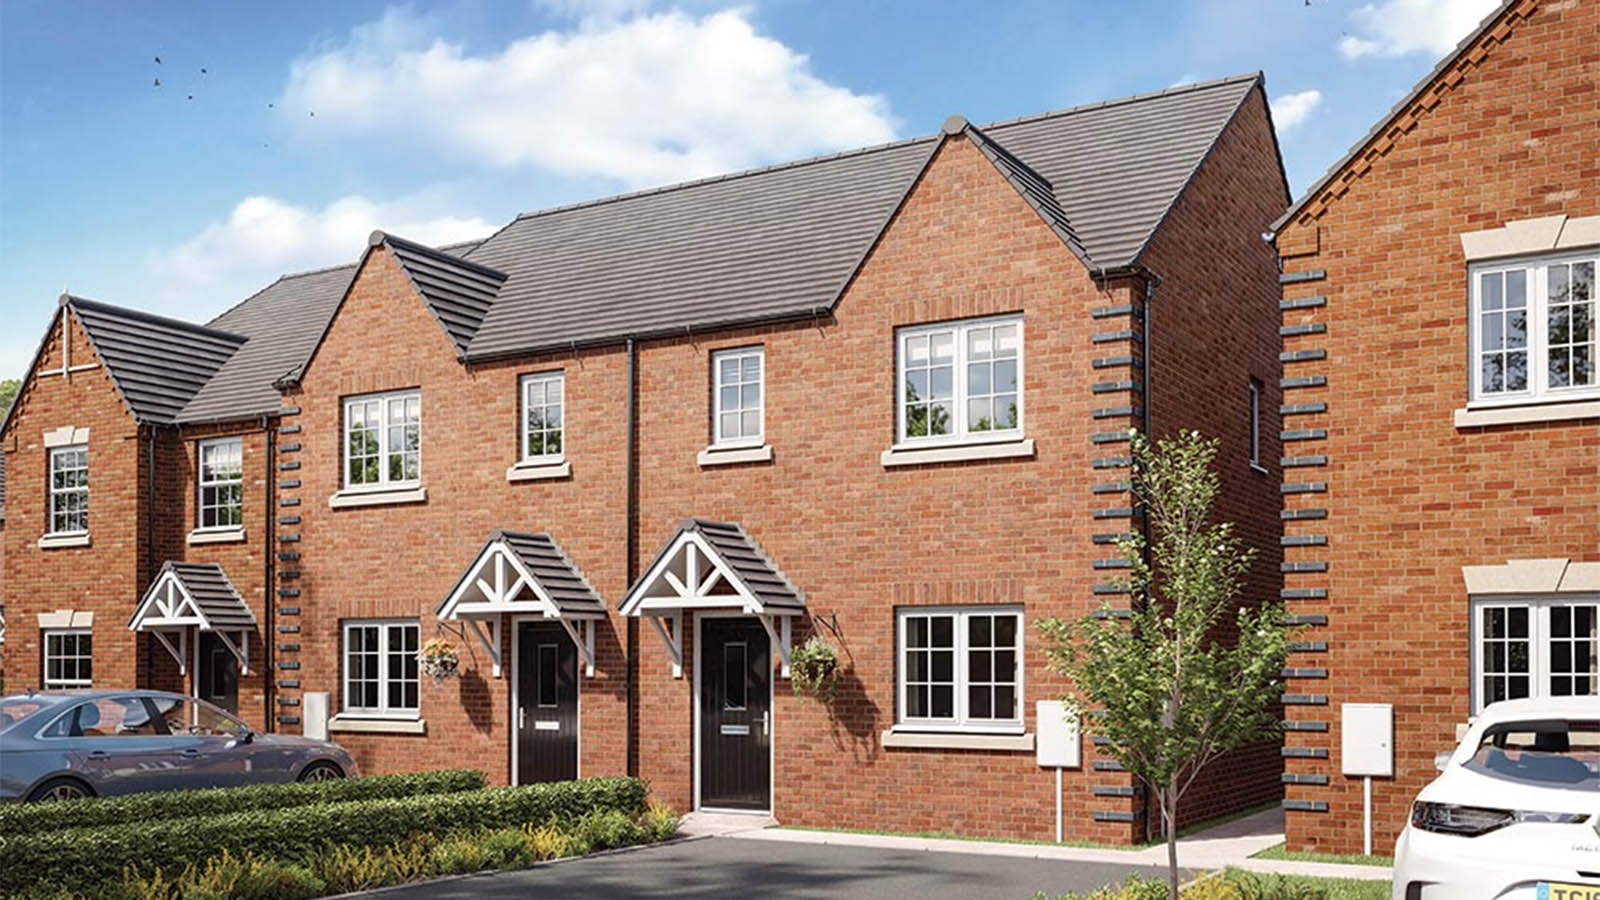 ‘The Pershore’ at Plum Meadow (Piper Homes)